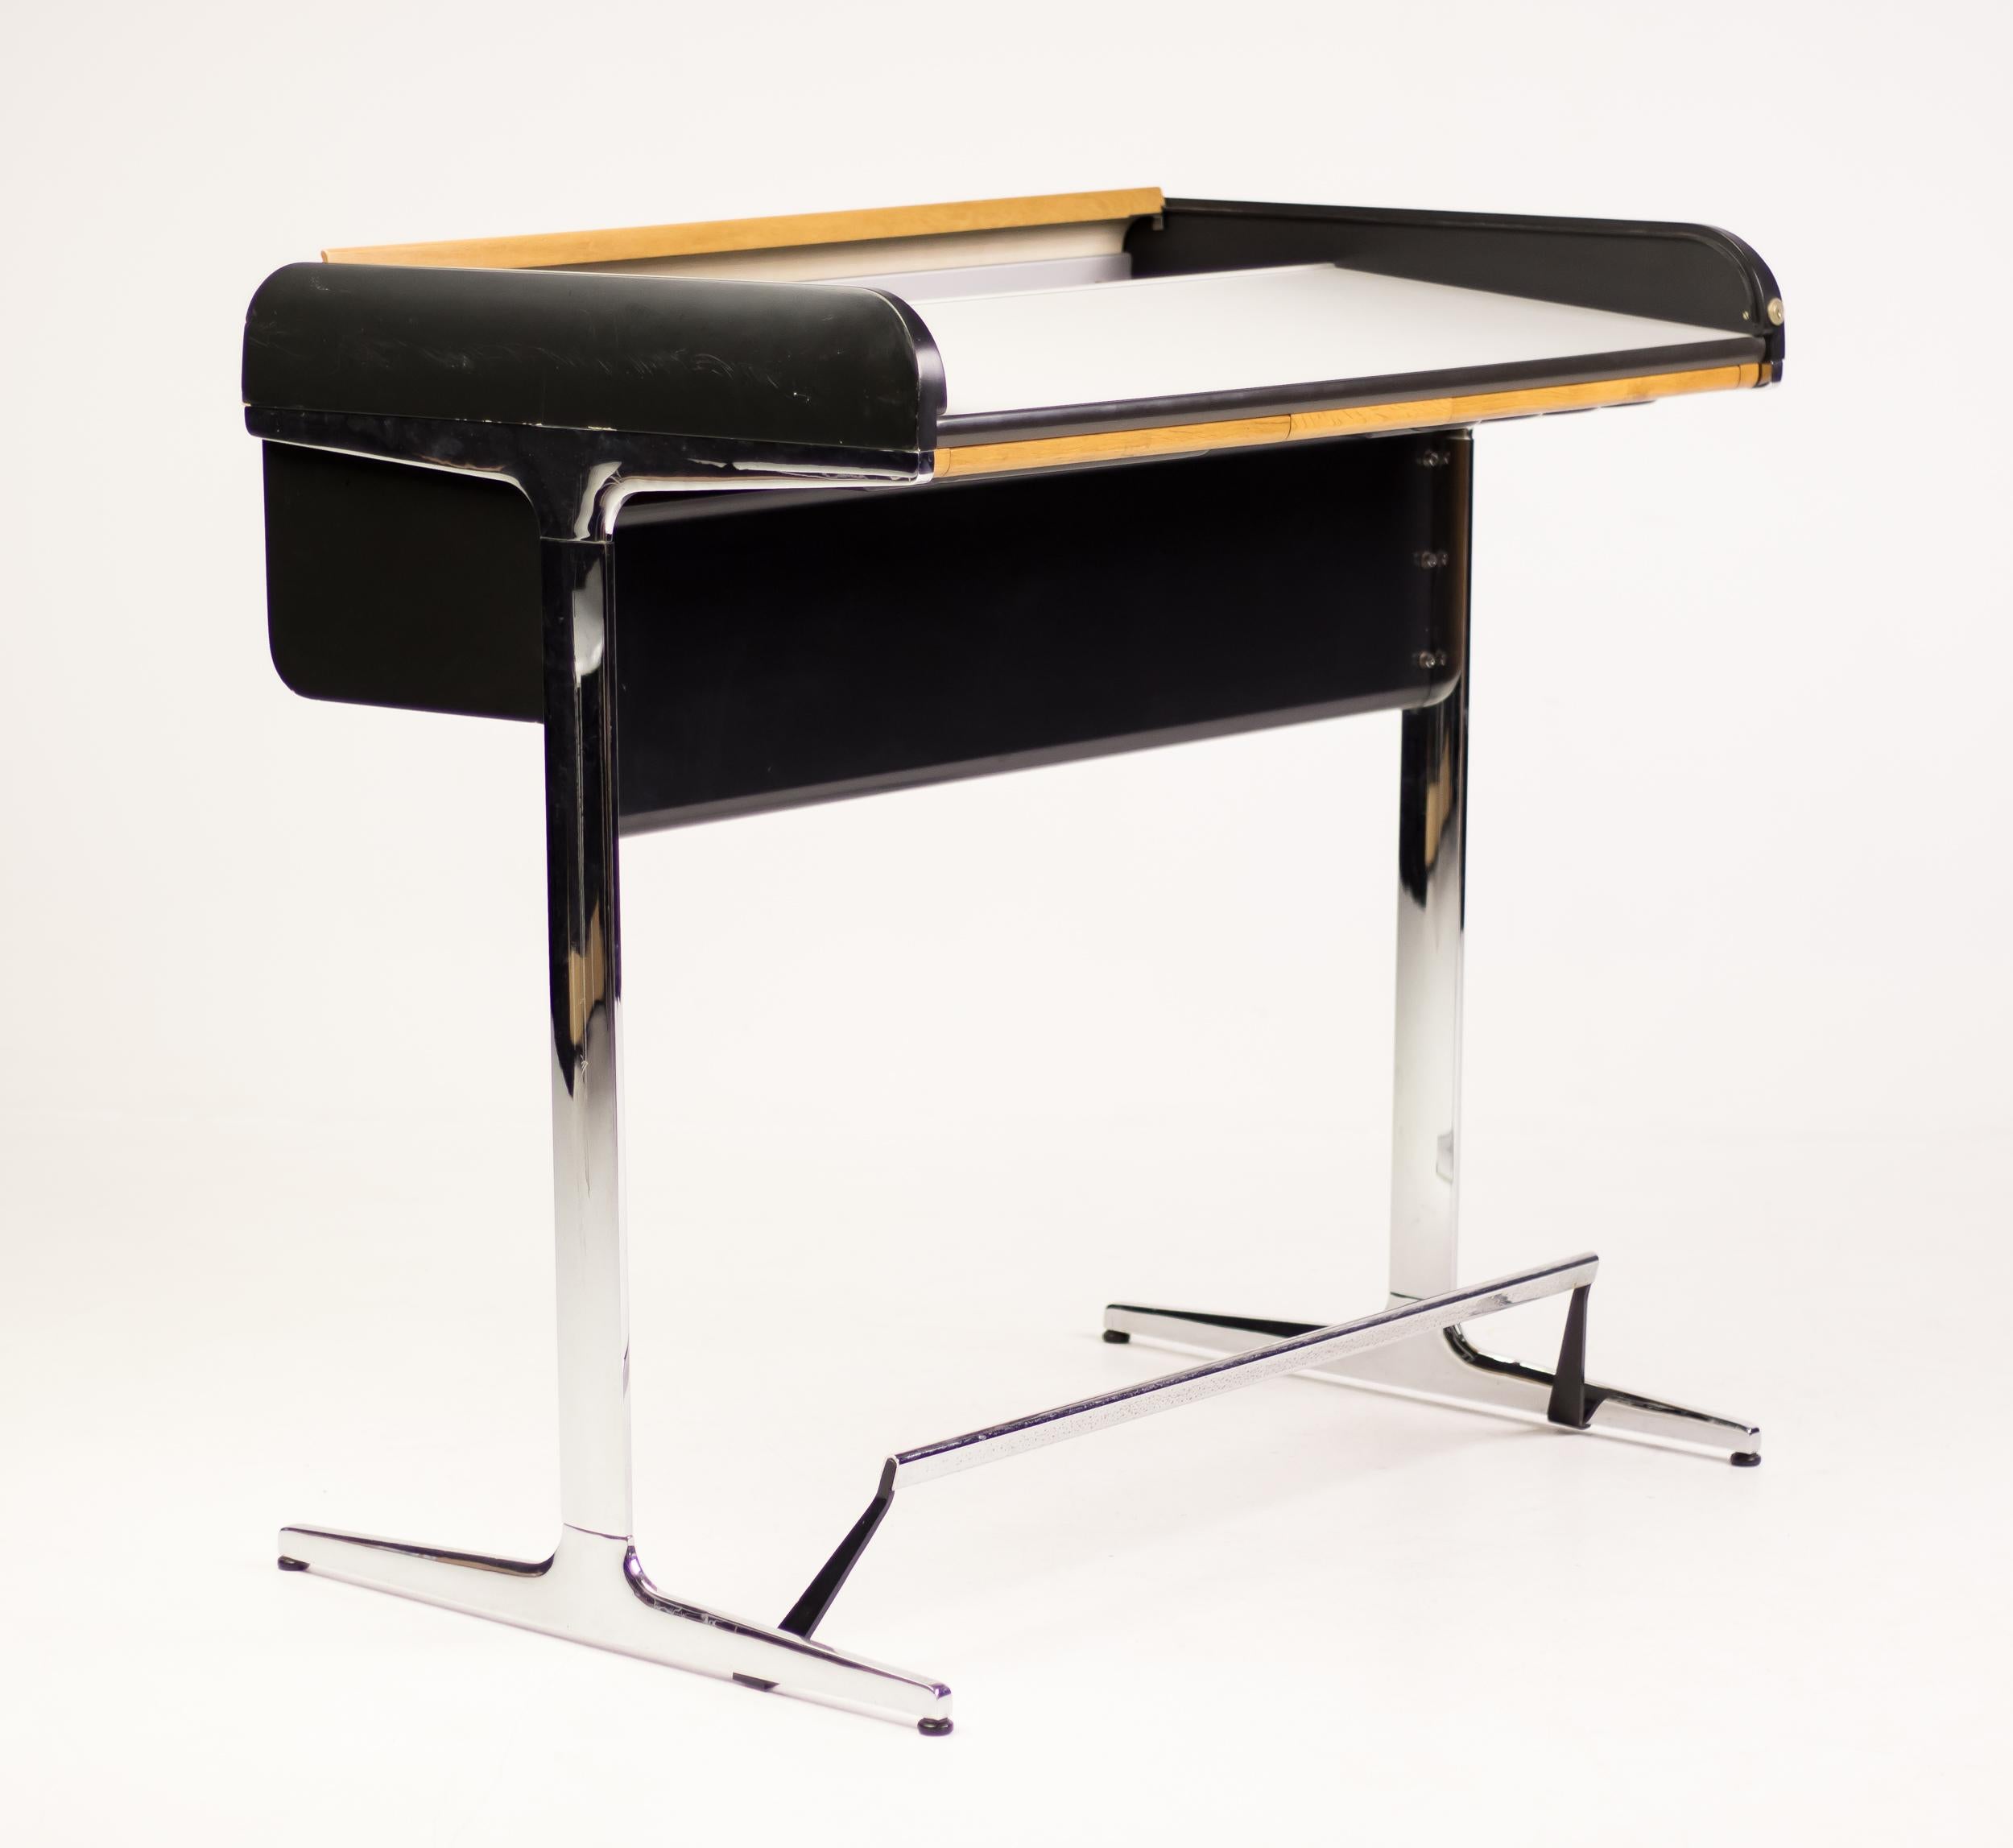 Spectacular architect's desk from the Action Office Series designed by George Nelson & Robert Propst for Herman Miller. 
Featuring an ash tambour top that opens up to reveal a large laminate working surface with designated storage space for files